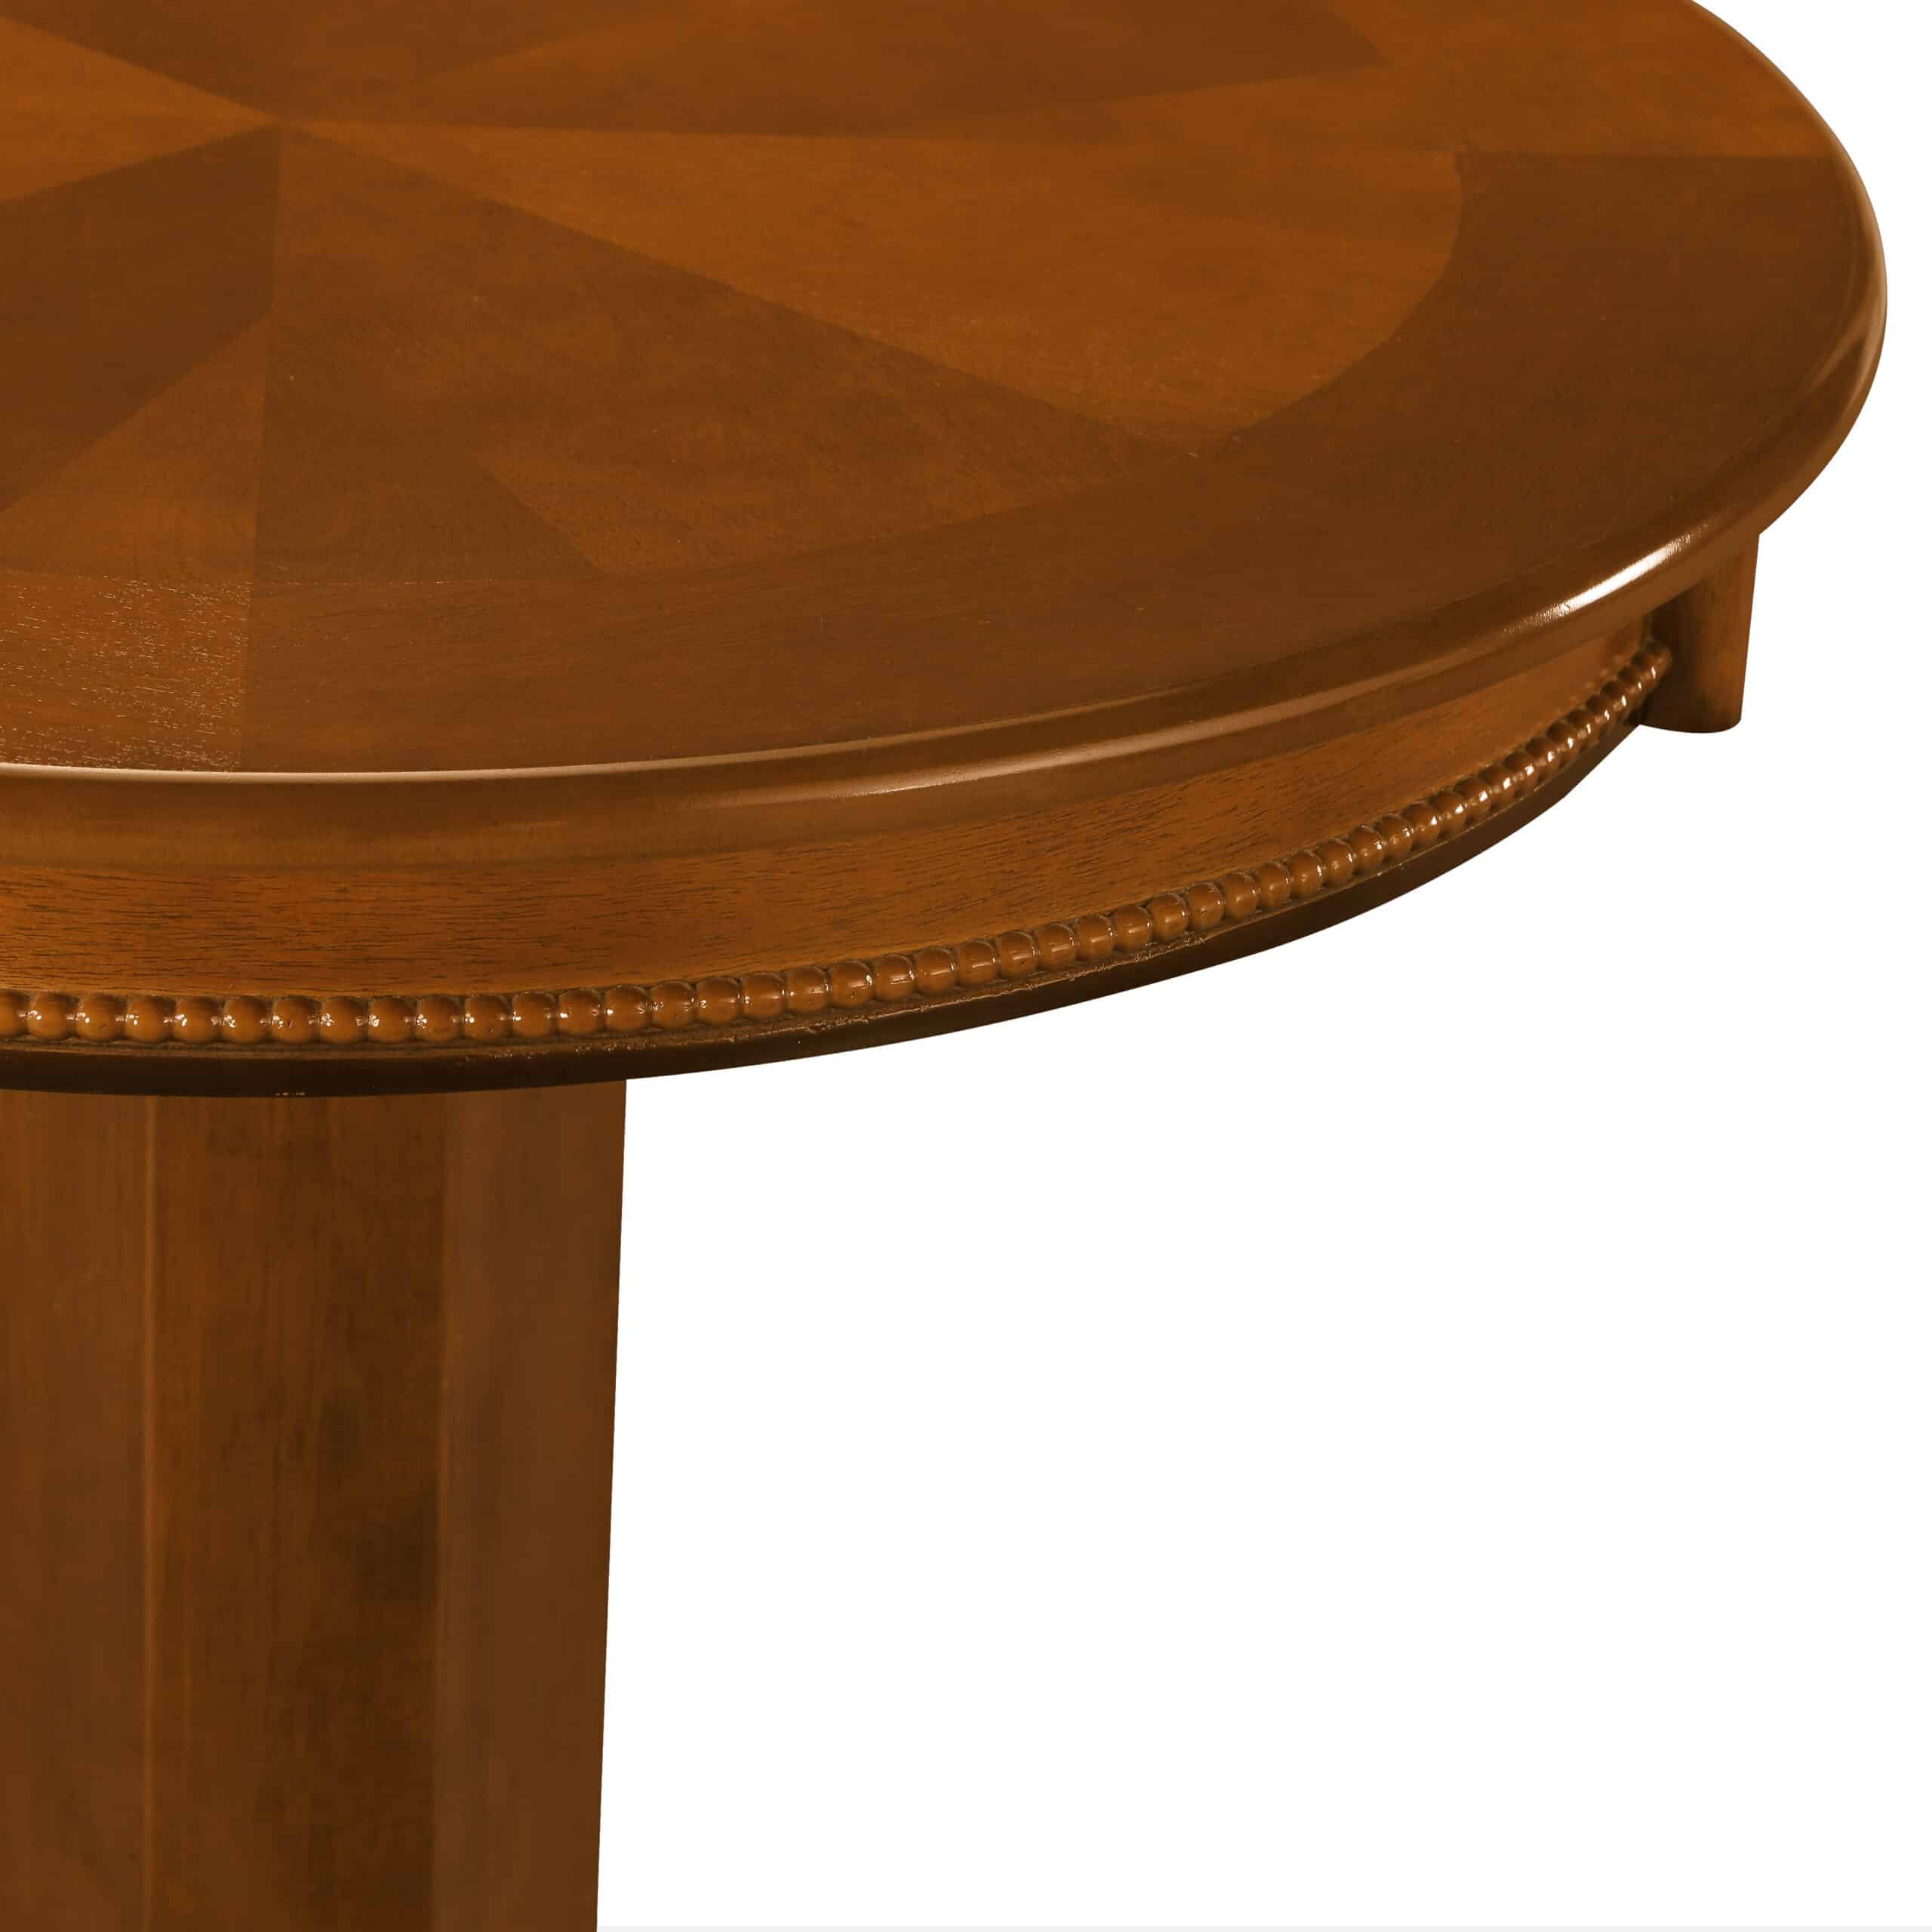 Boraam Florence 42in. Height Round Wood Pub Table - Cherry Finish - image 4 of 6